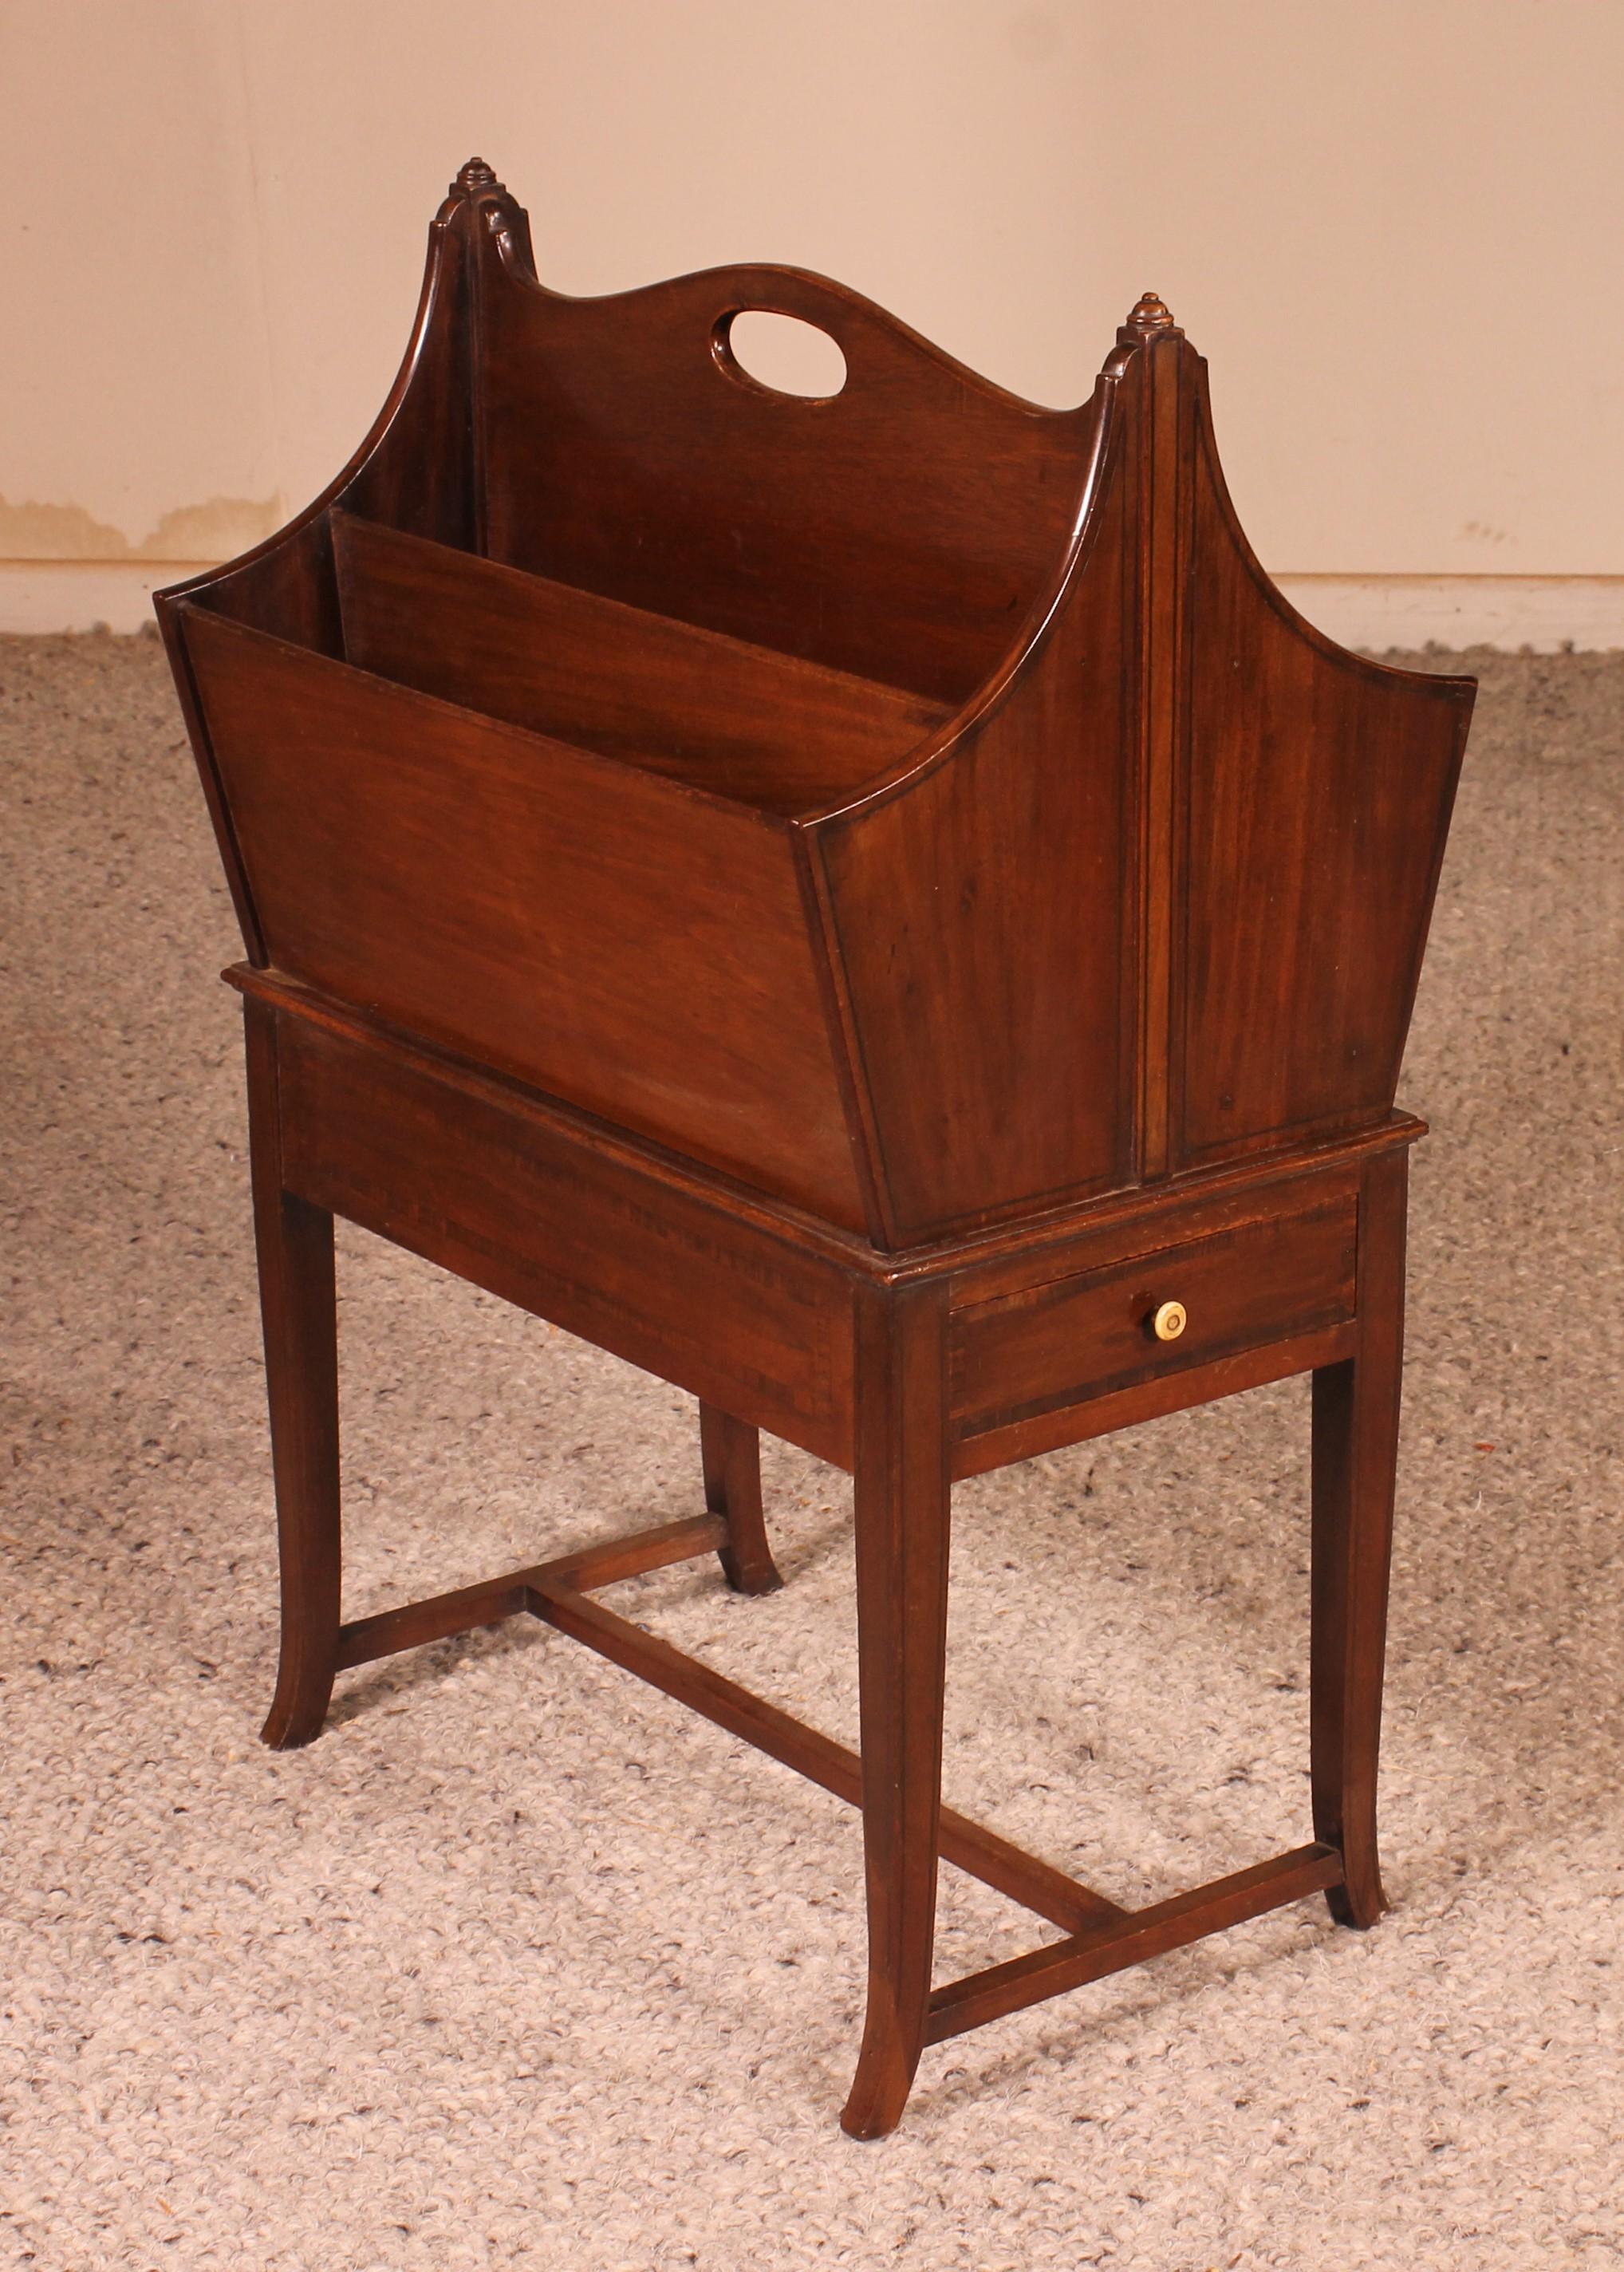 lovely English mahogany canterburry from the early 20th century, Edwardian period

Small practical piece which has a drawer and which serves as a newspaper/magazine rack
The canterbury divers from the usual canterbury by its shape. It is narrower